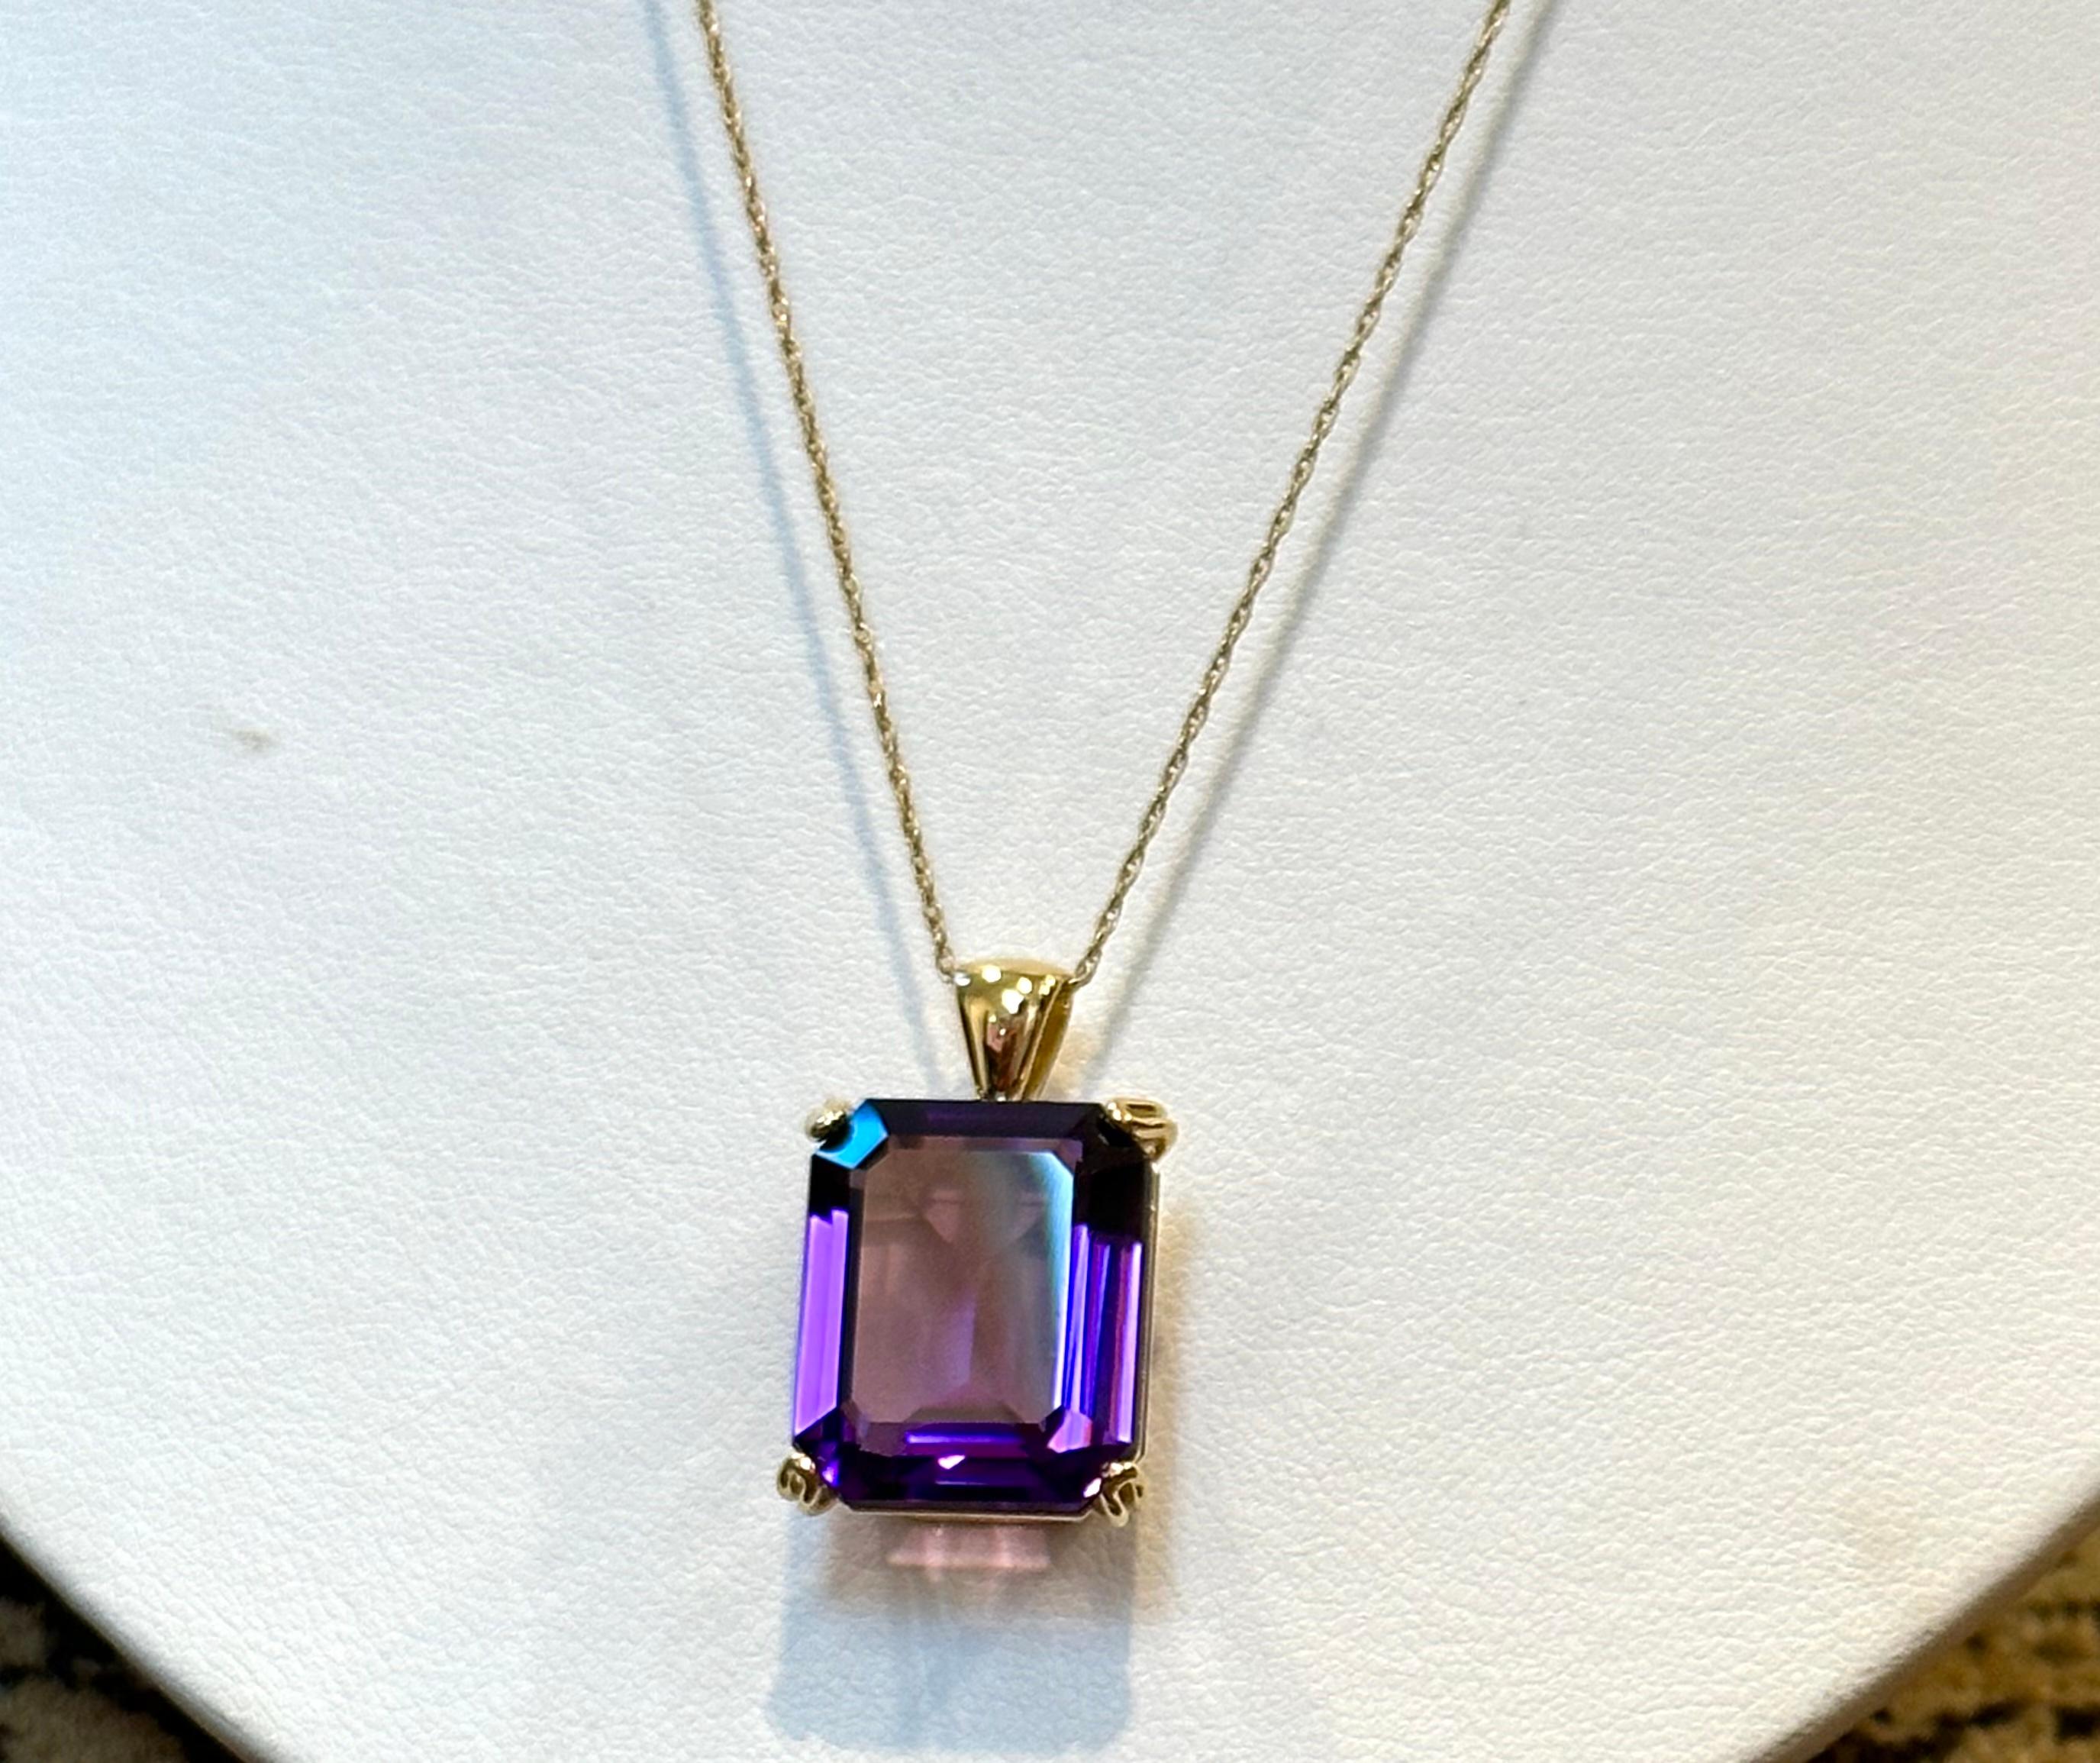 14 Ct Emerald Cut Amethyst Pendant/Neck 18Kt  Gold + 14 Kt Yellow Gold Chain For Sale 7